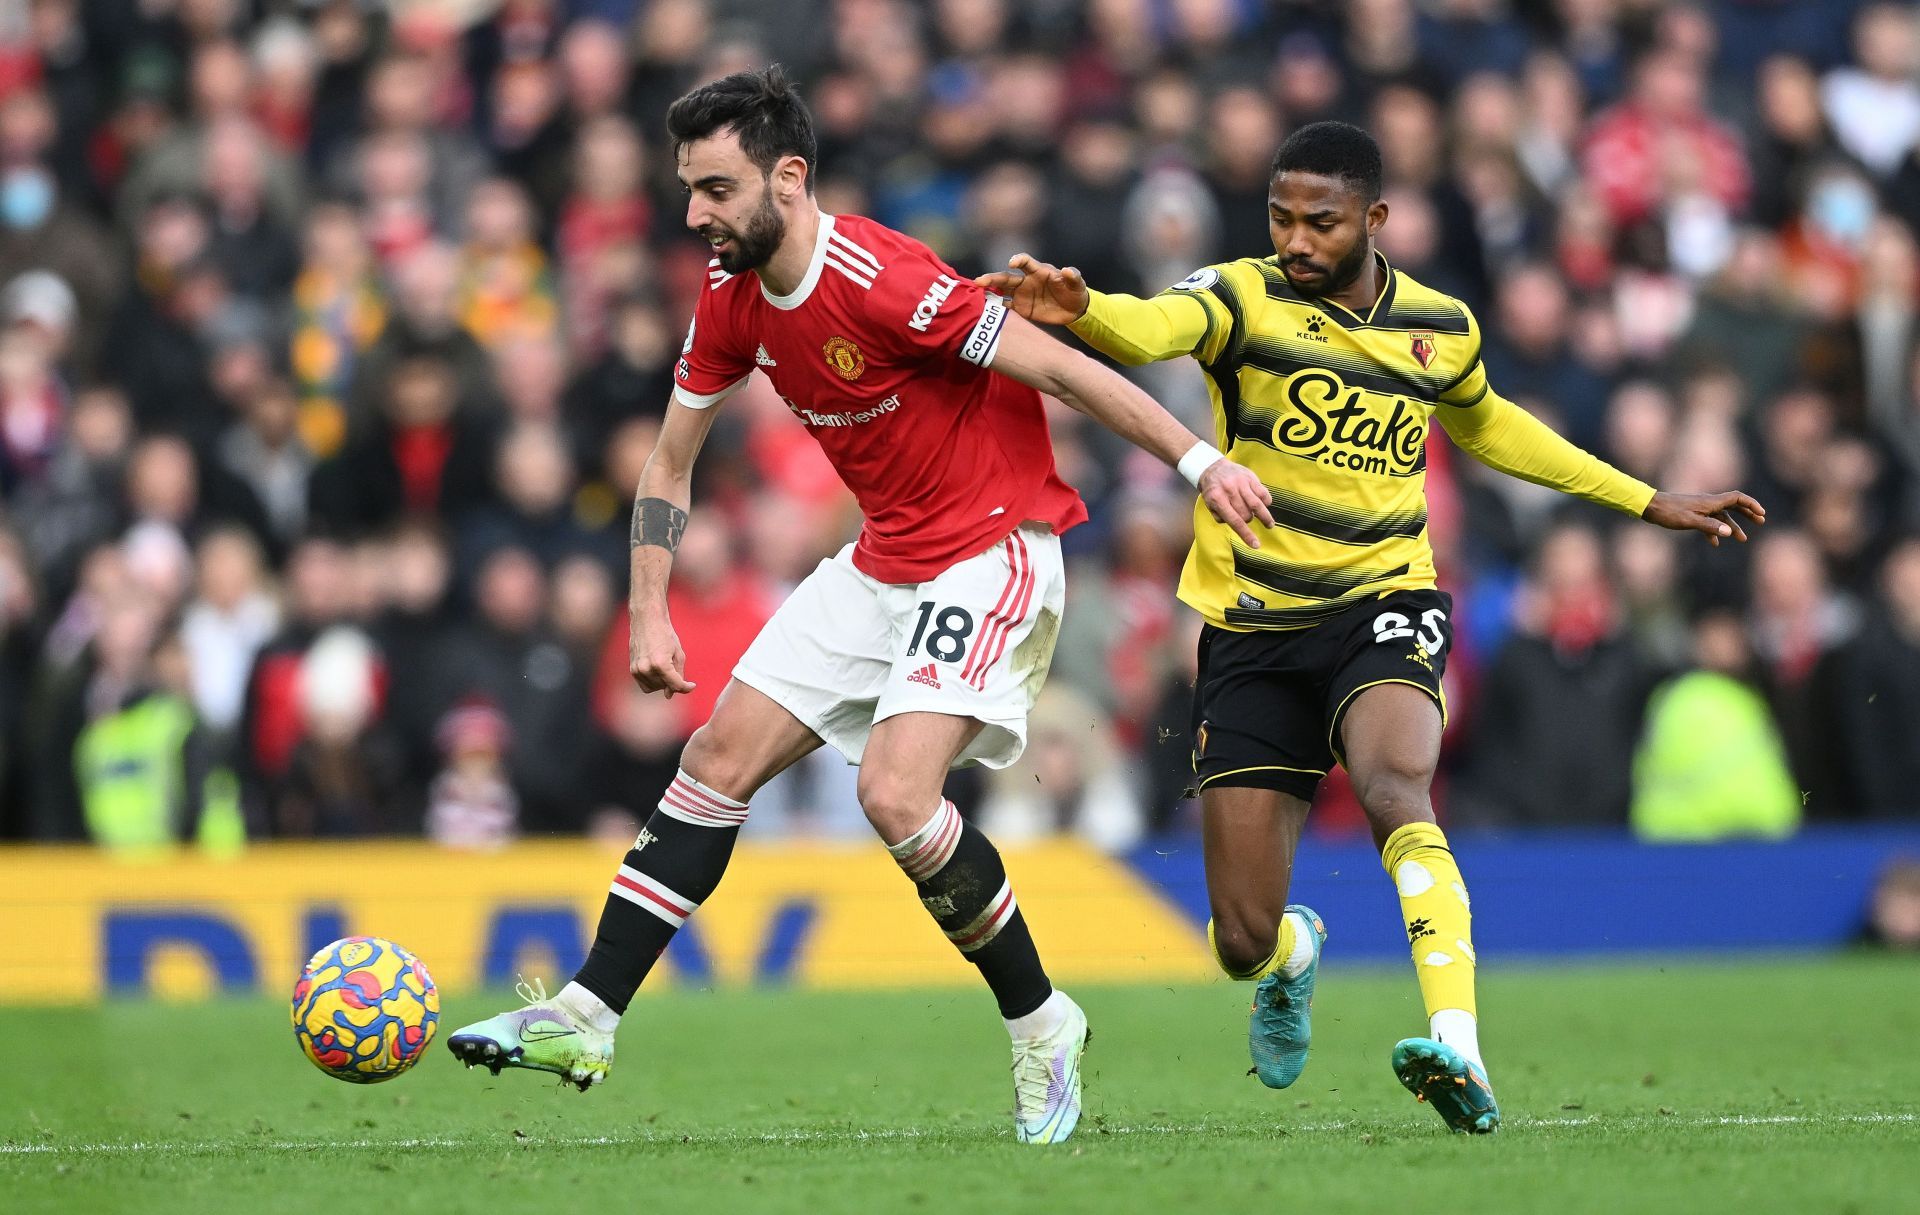 Manchester United and Watford played out a 0-0 draw in their Premier League tie on Saturday